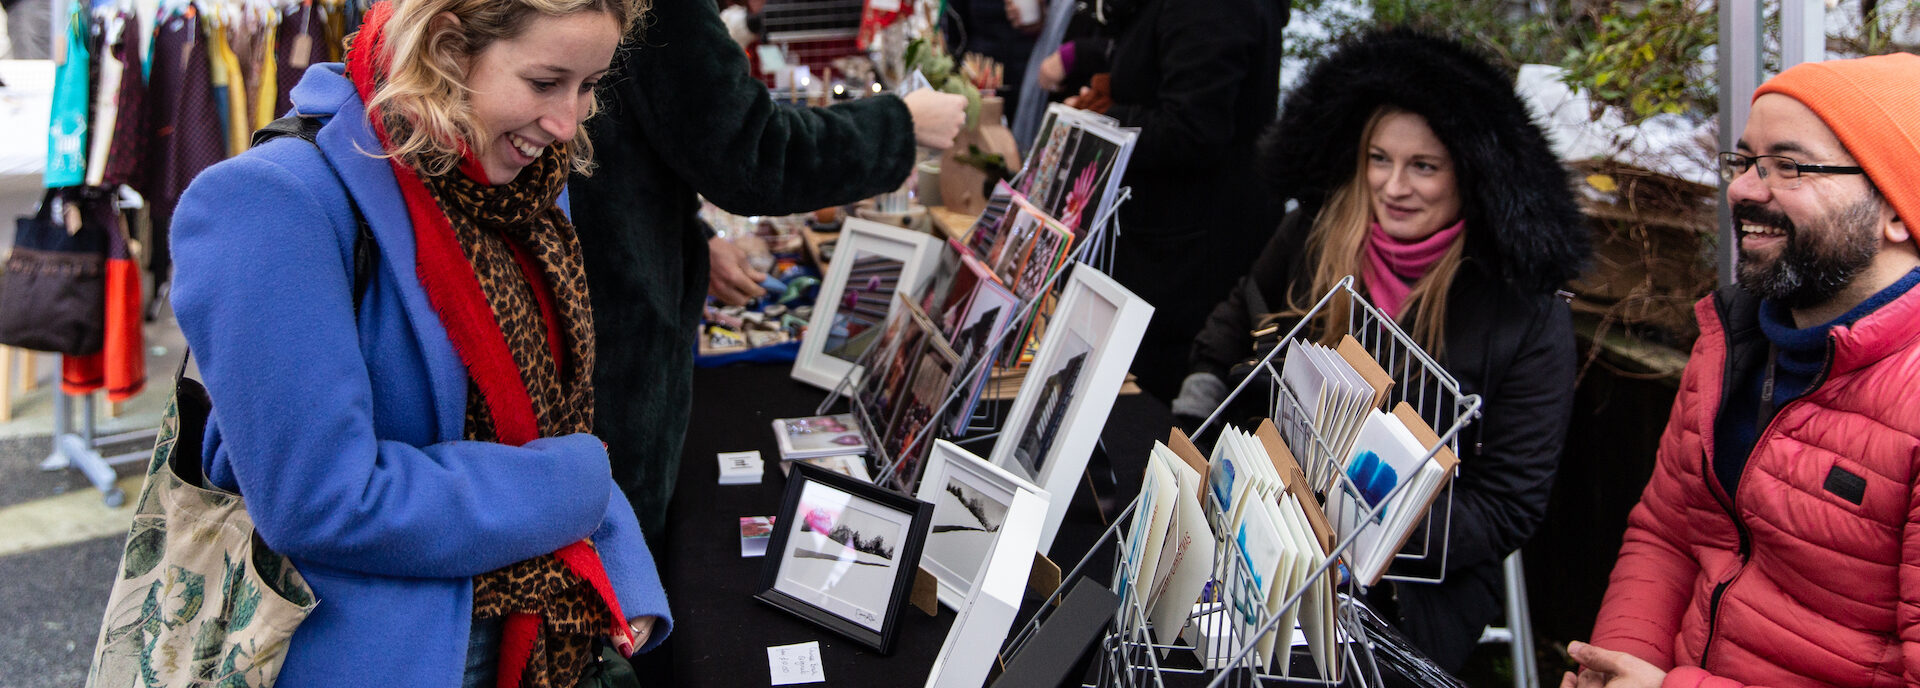 A person looks at greeting cards at a market stall, chatting to the two sellers across the table